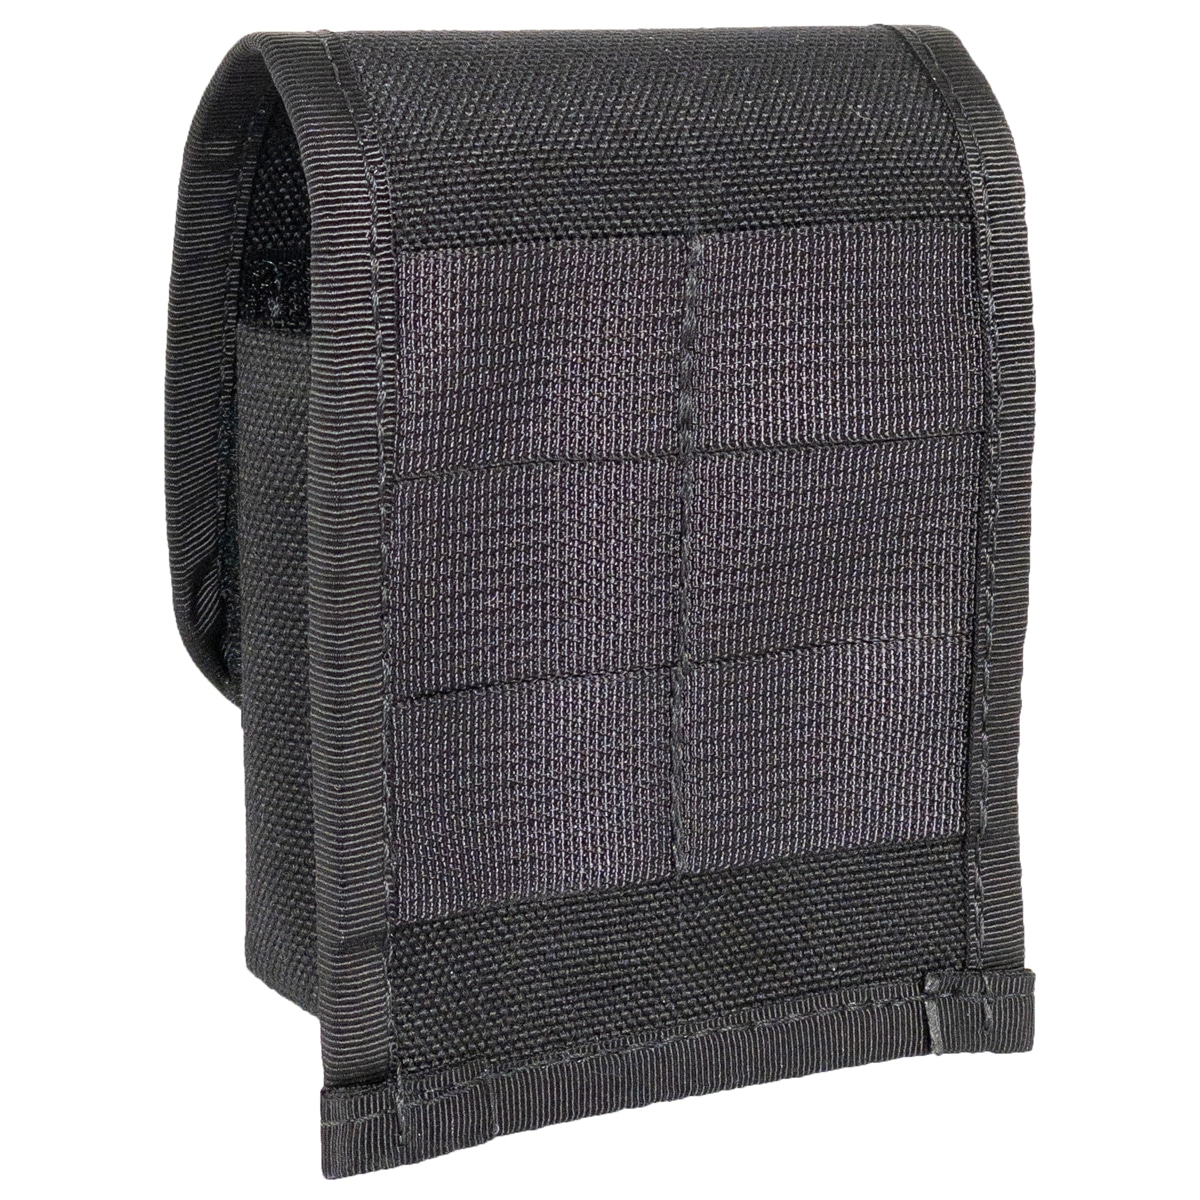 Handcuff MOLLE pouch for Cowell Tactical Vests